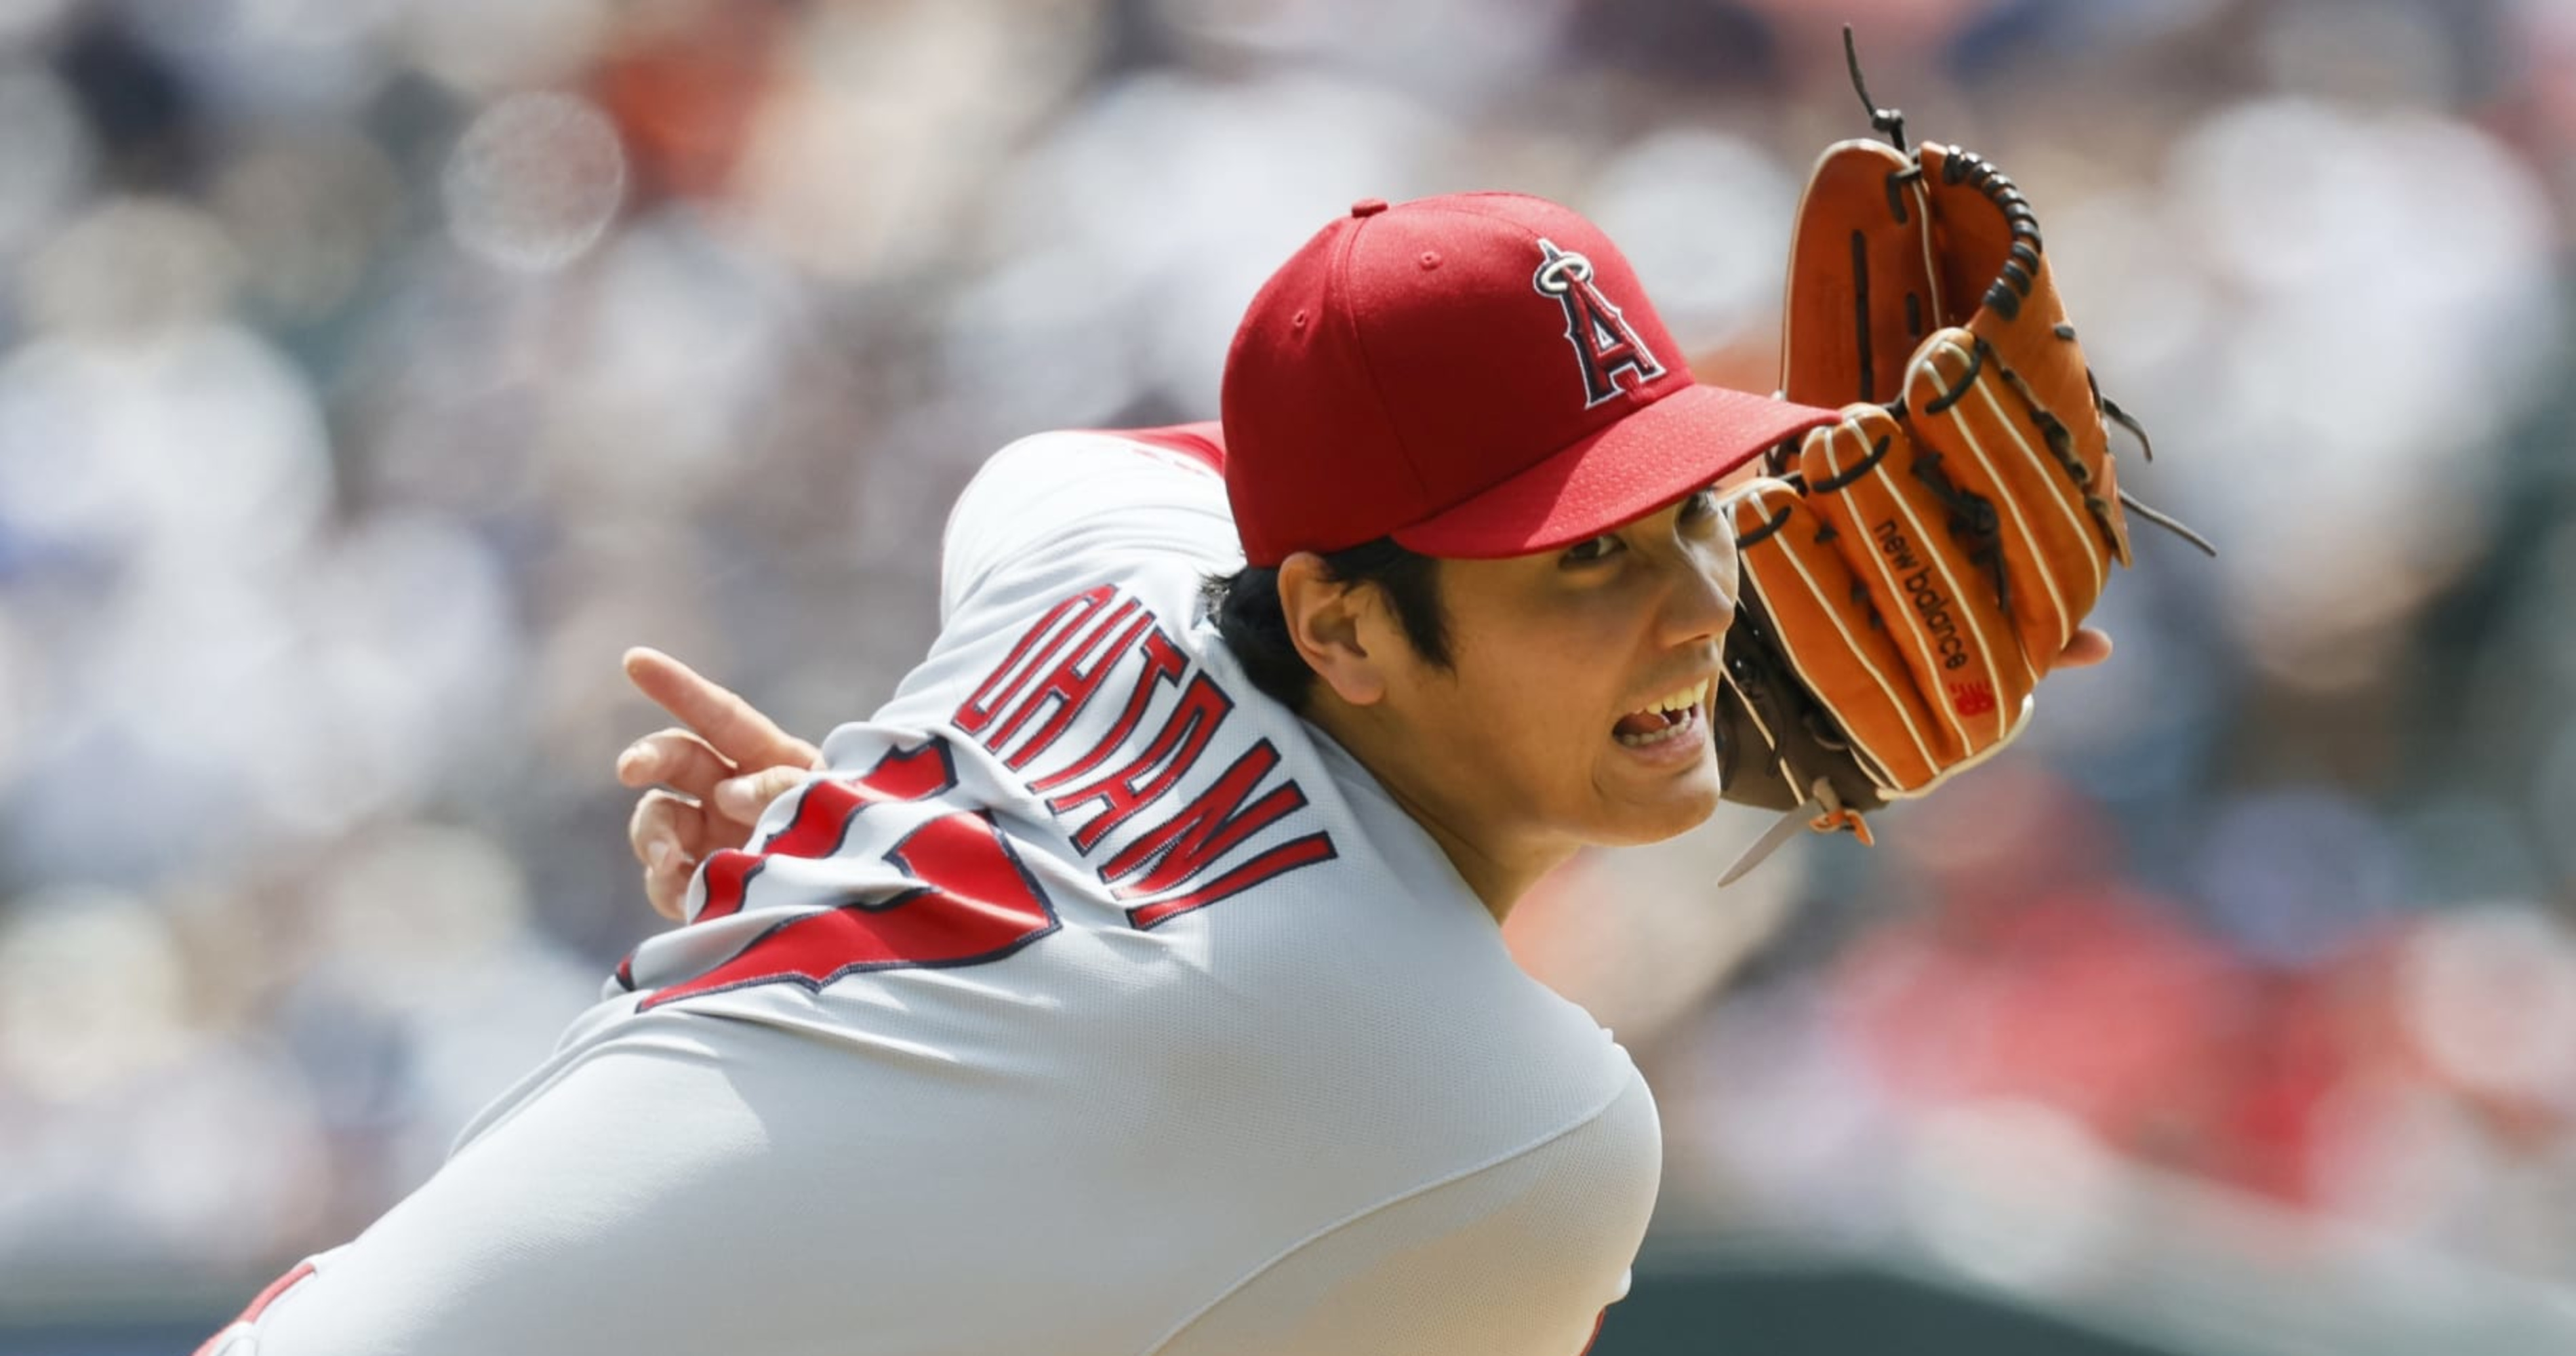 Angels' Ohtani leaves game against Tigers with stomach virus